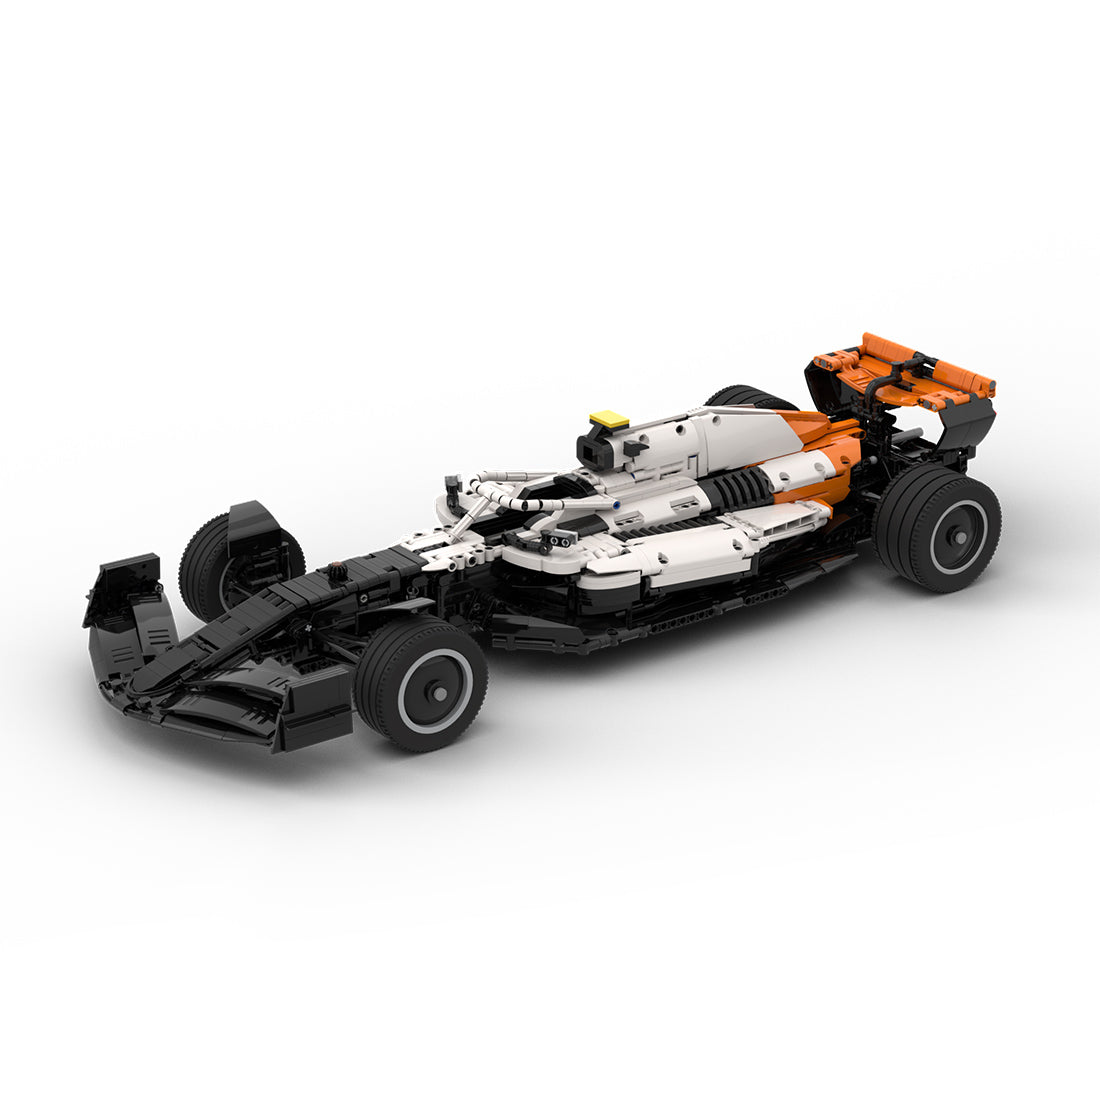 MOC-148597 MCL60 1/8 Scale Racing Car